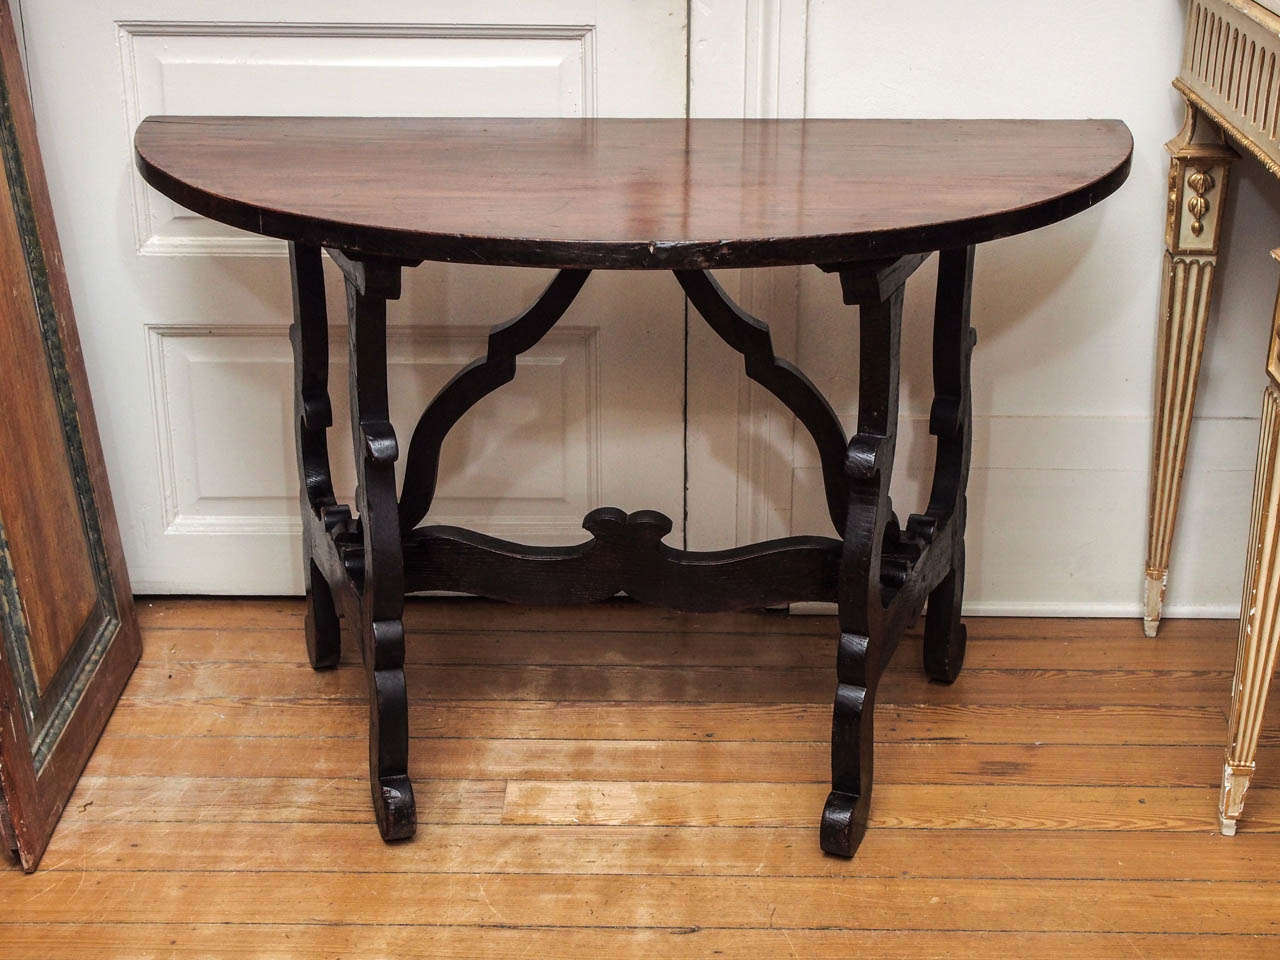 Pair of 19th c. Italian Demi Lune Tables that can be connected to make a center table.